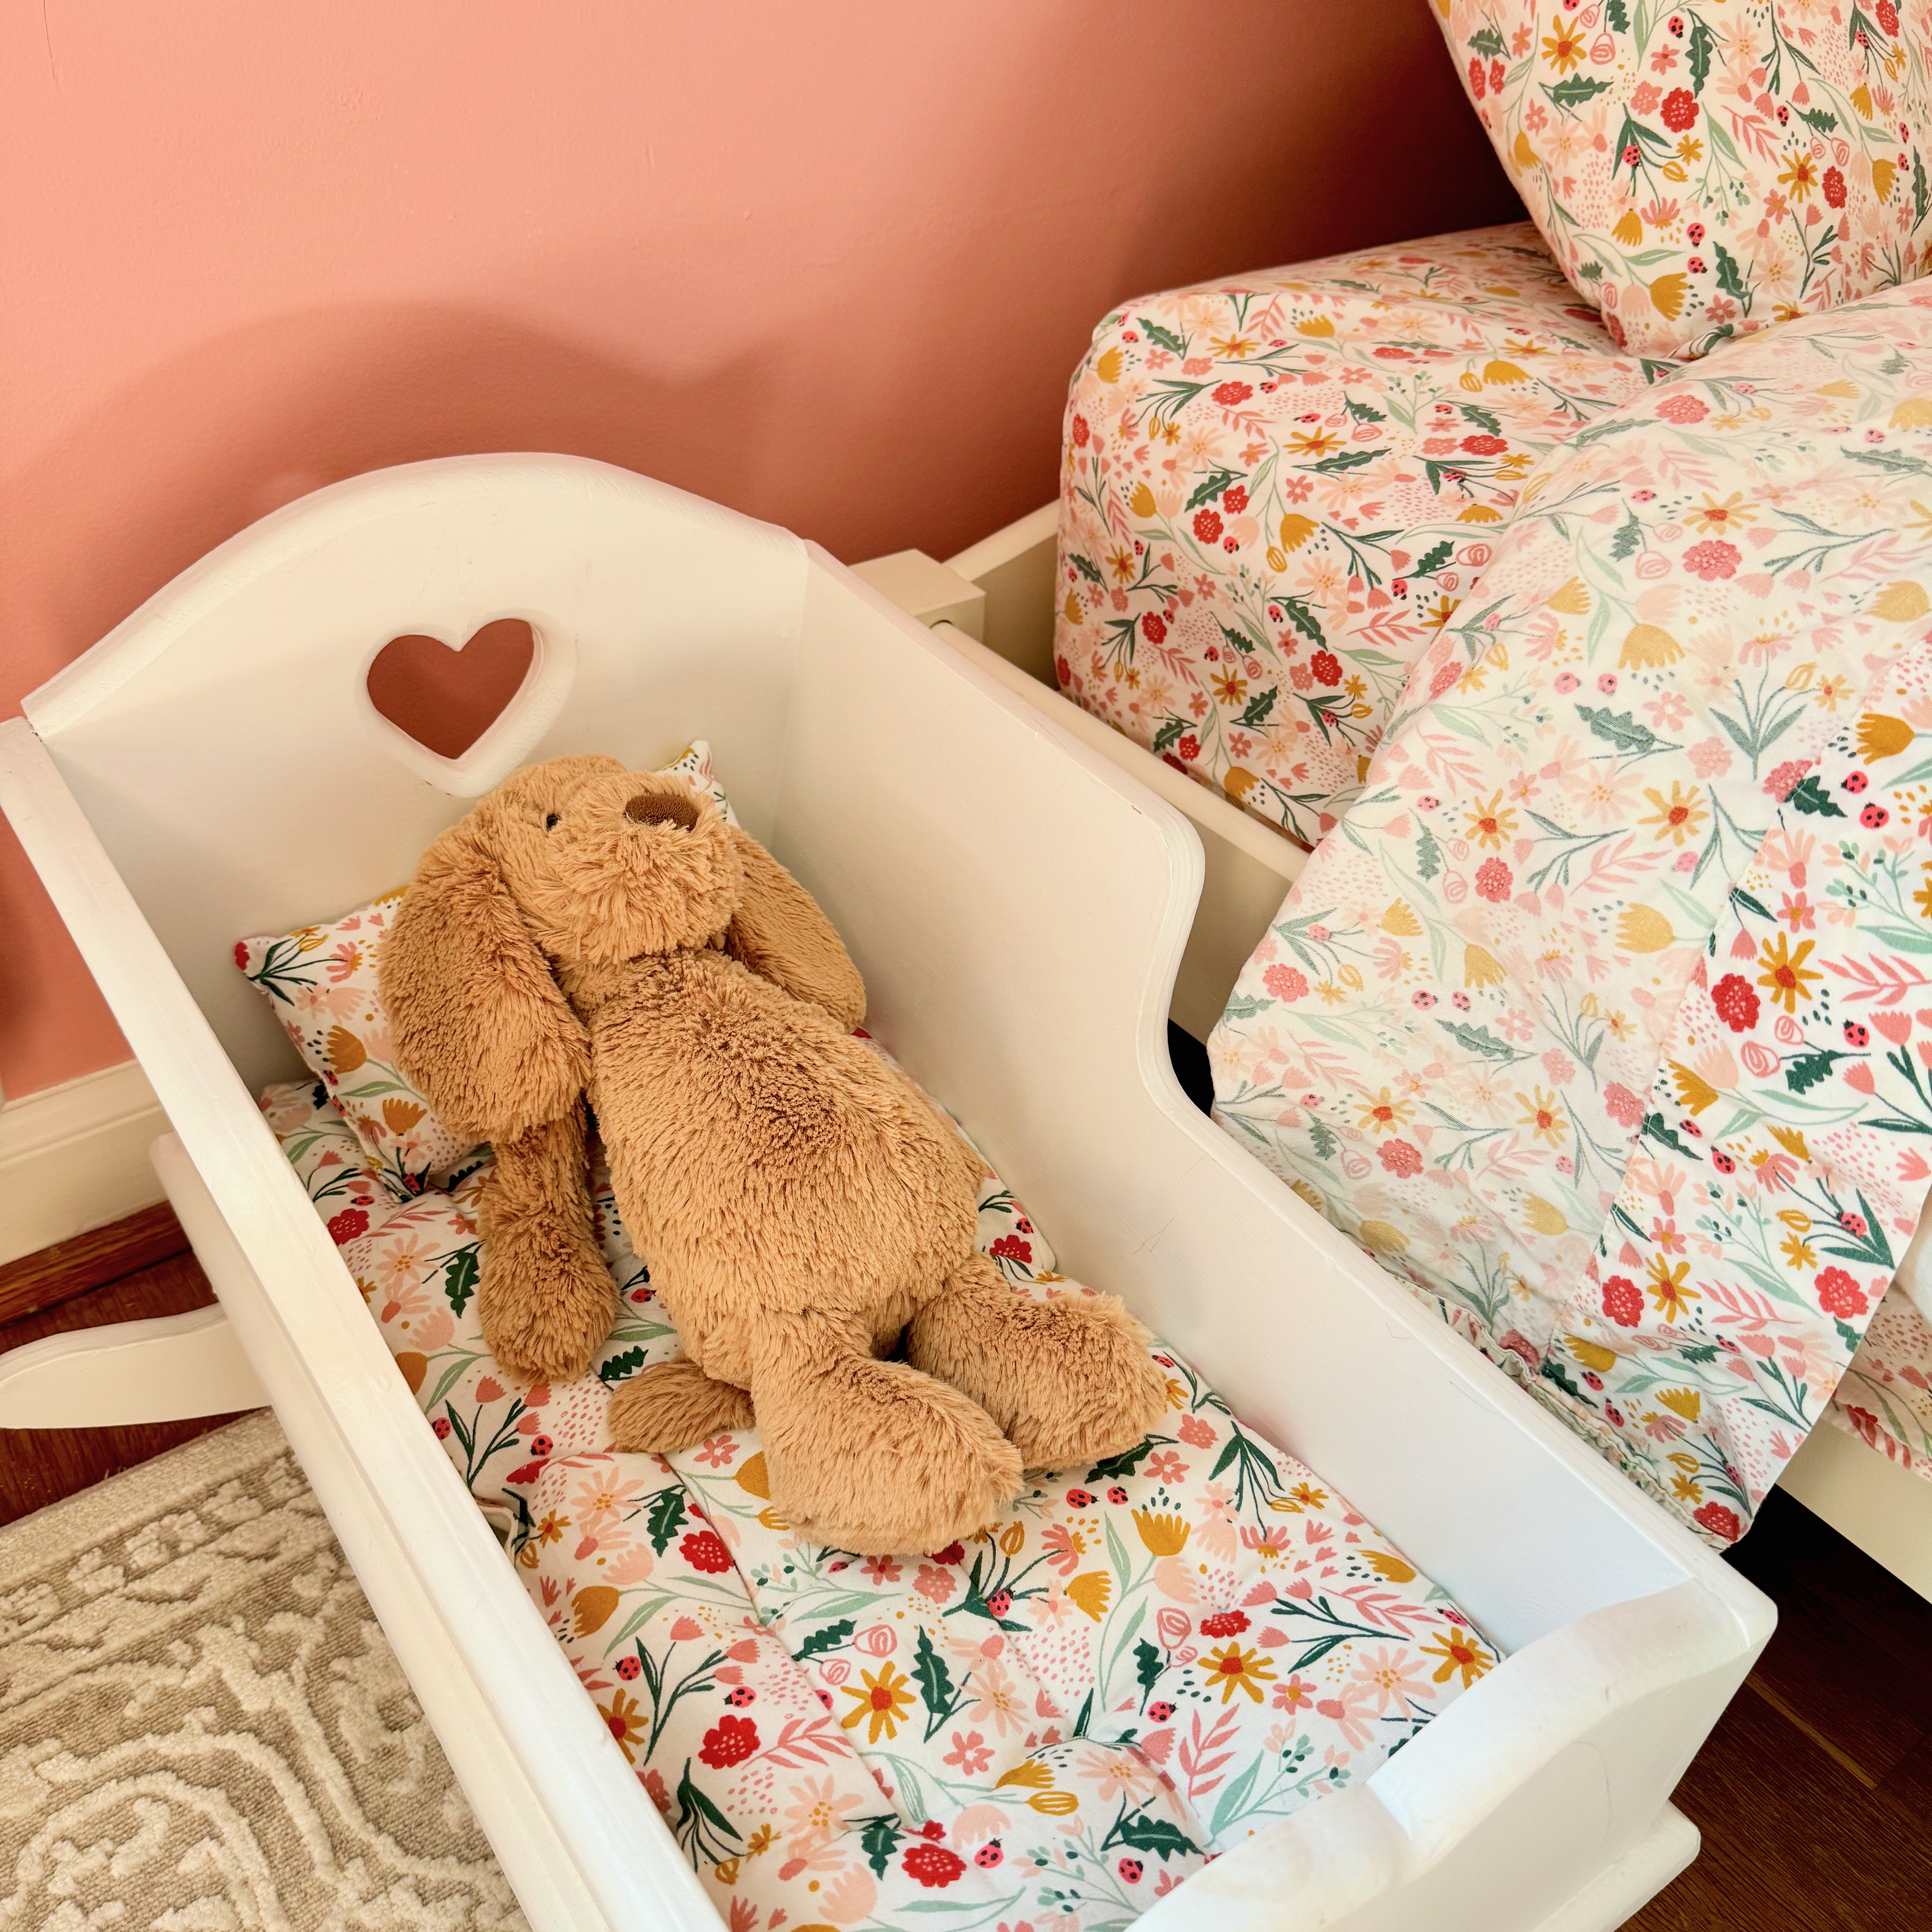 How to Sew a Doll Bed Mattress